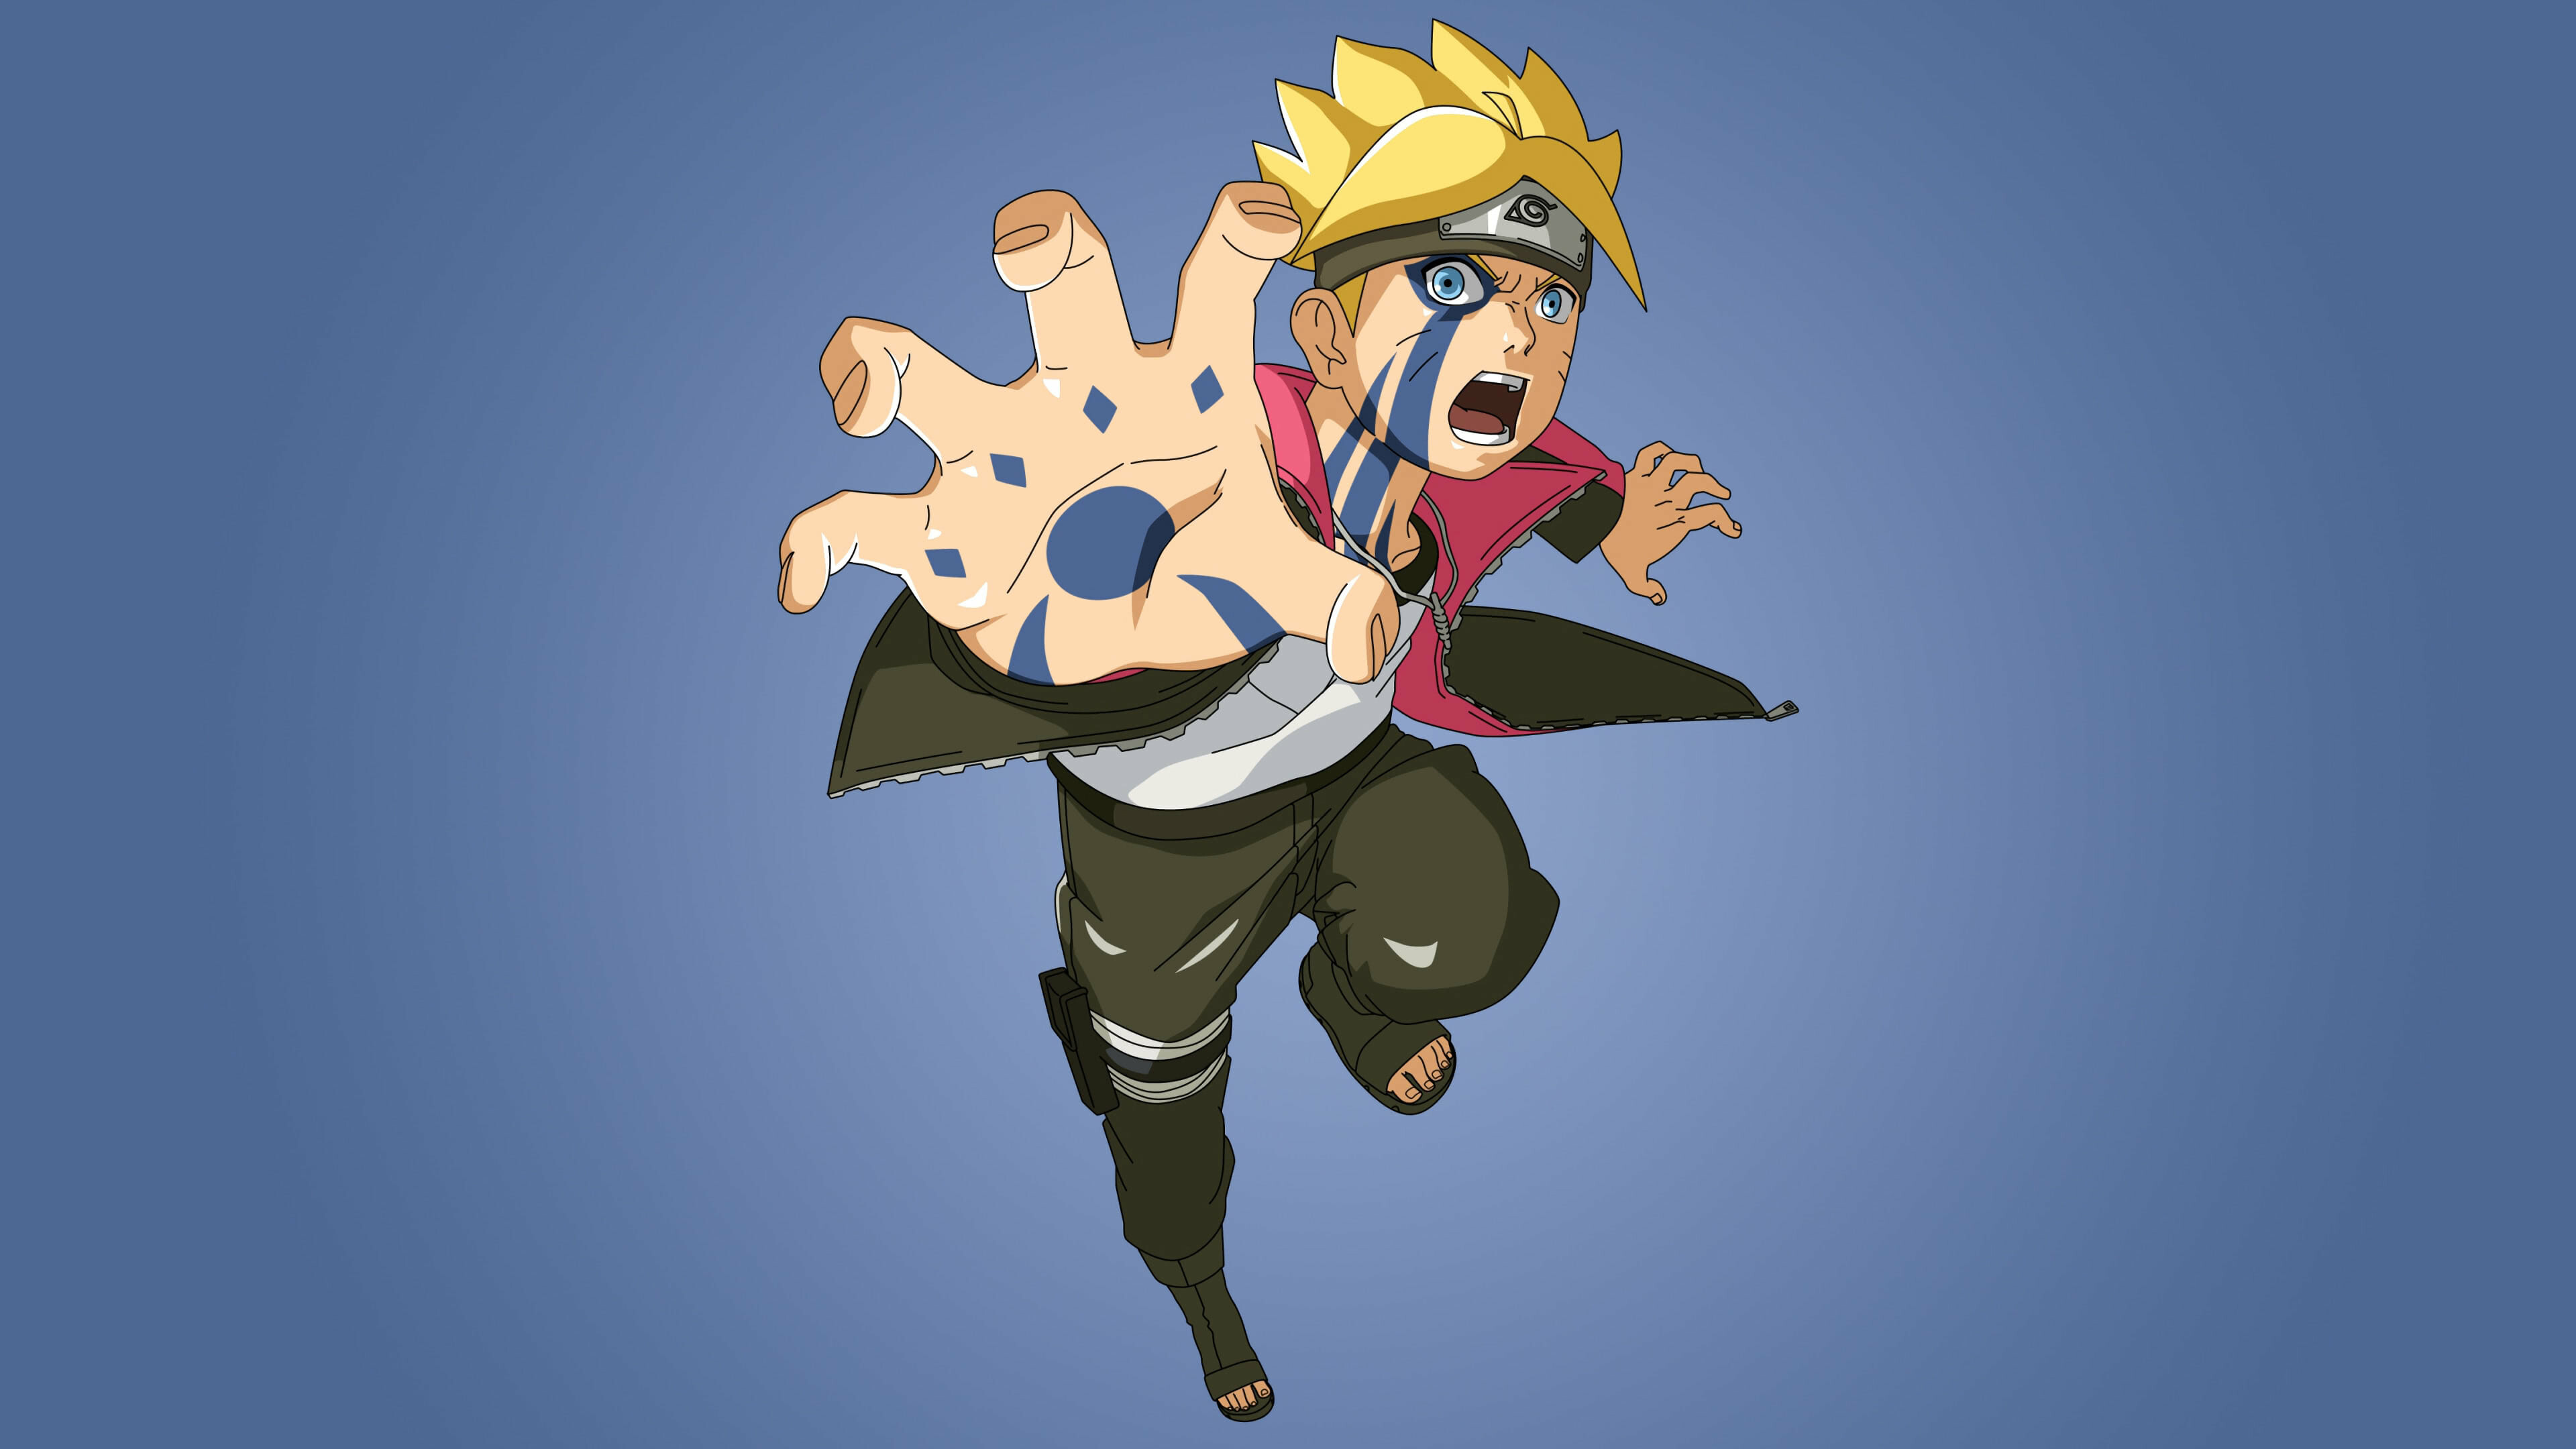 Naruto: A mischievous adolescent ninja, searching for recognition and dreams of becoming the Hokage. 3840x2160 4K Background.